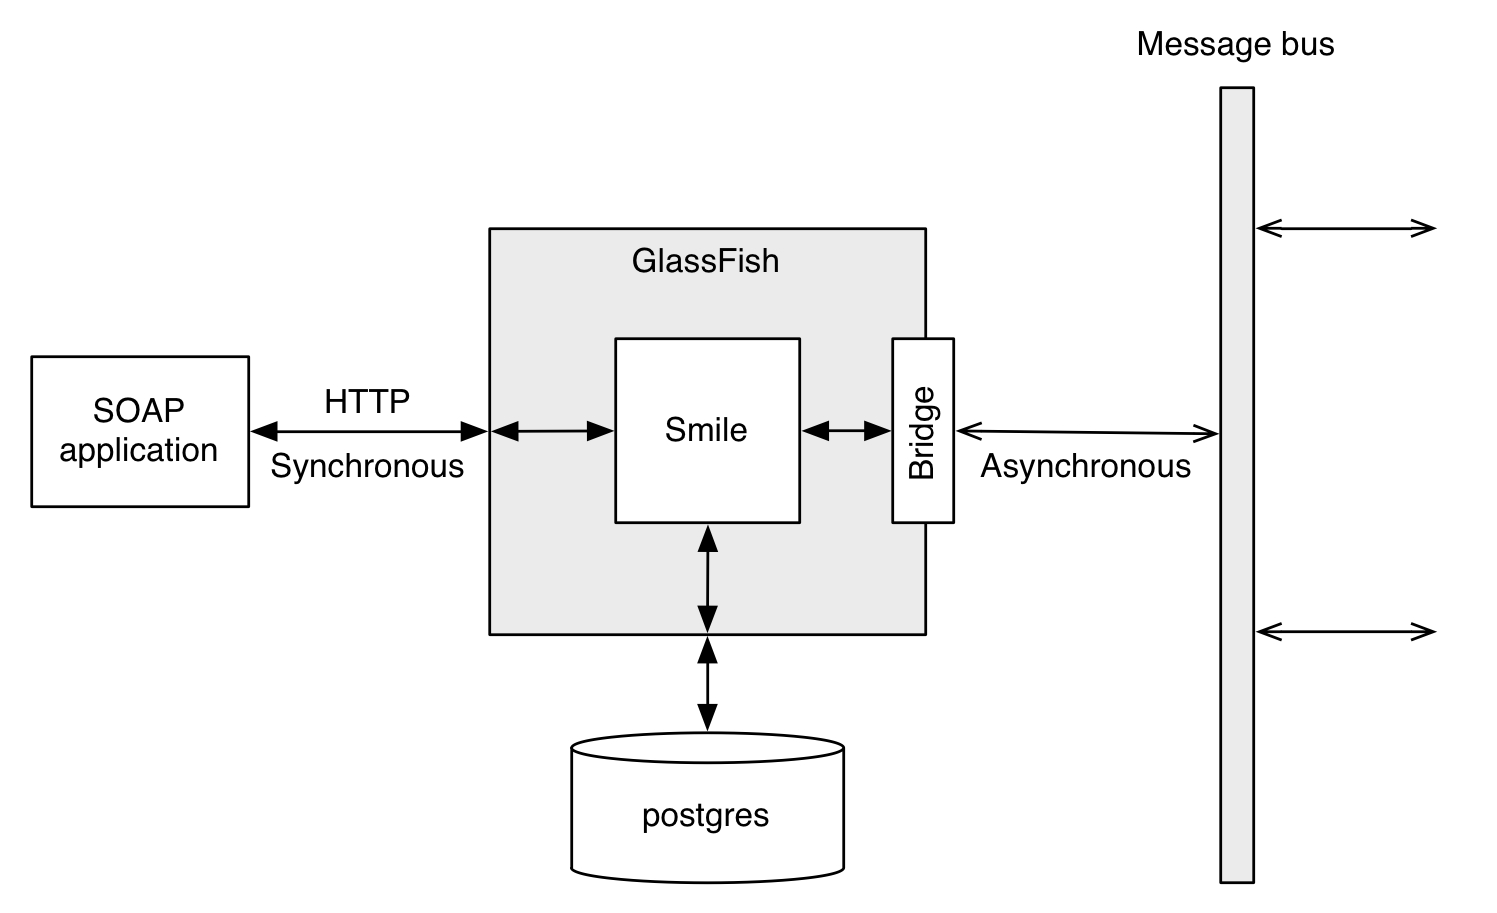 The image shows the API architecture.